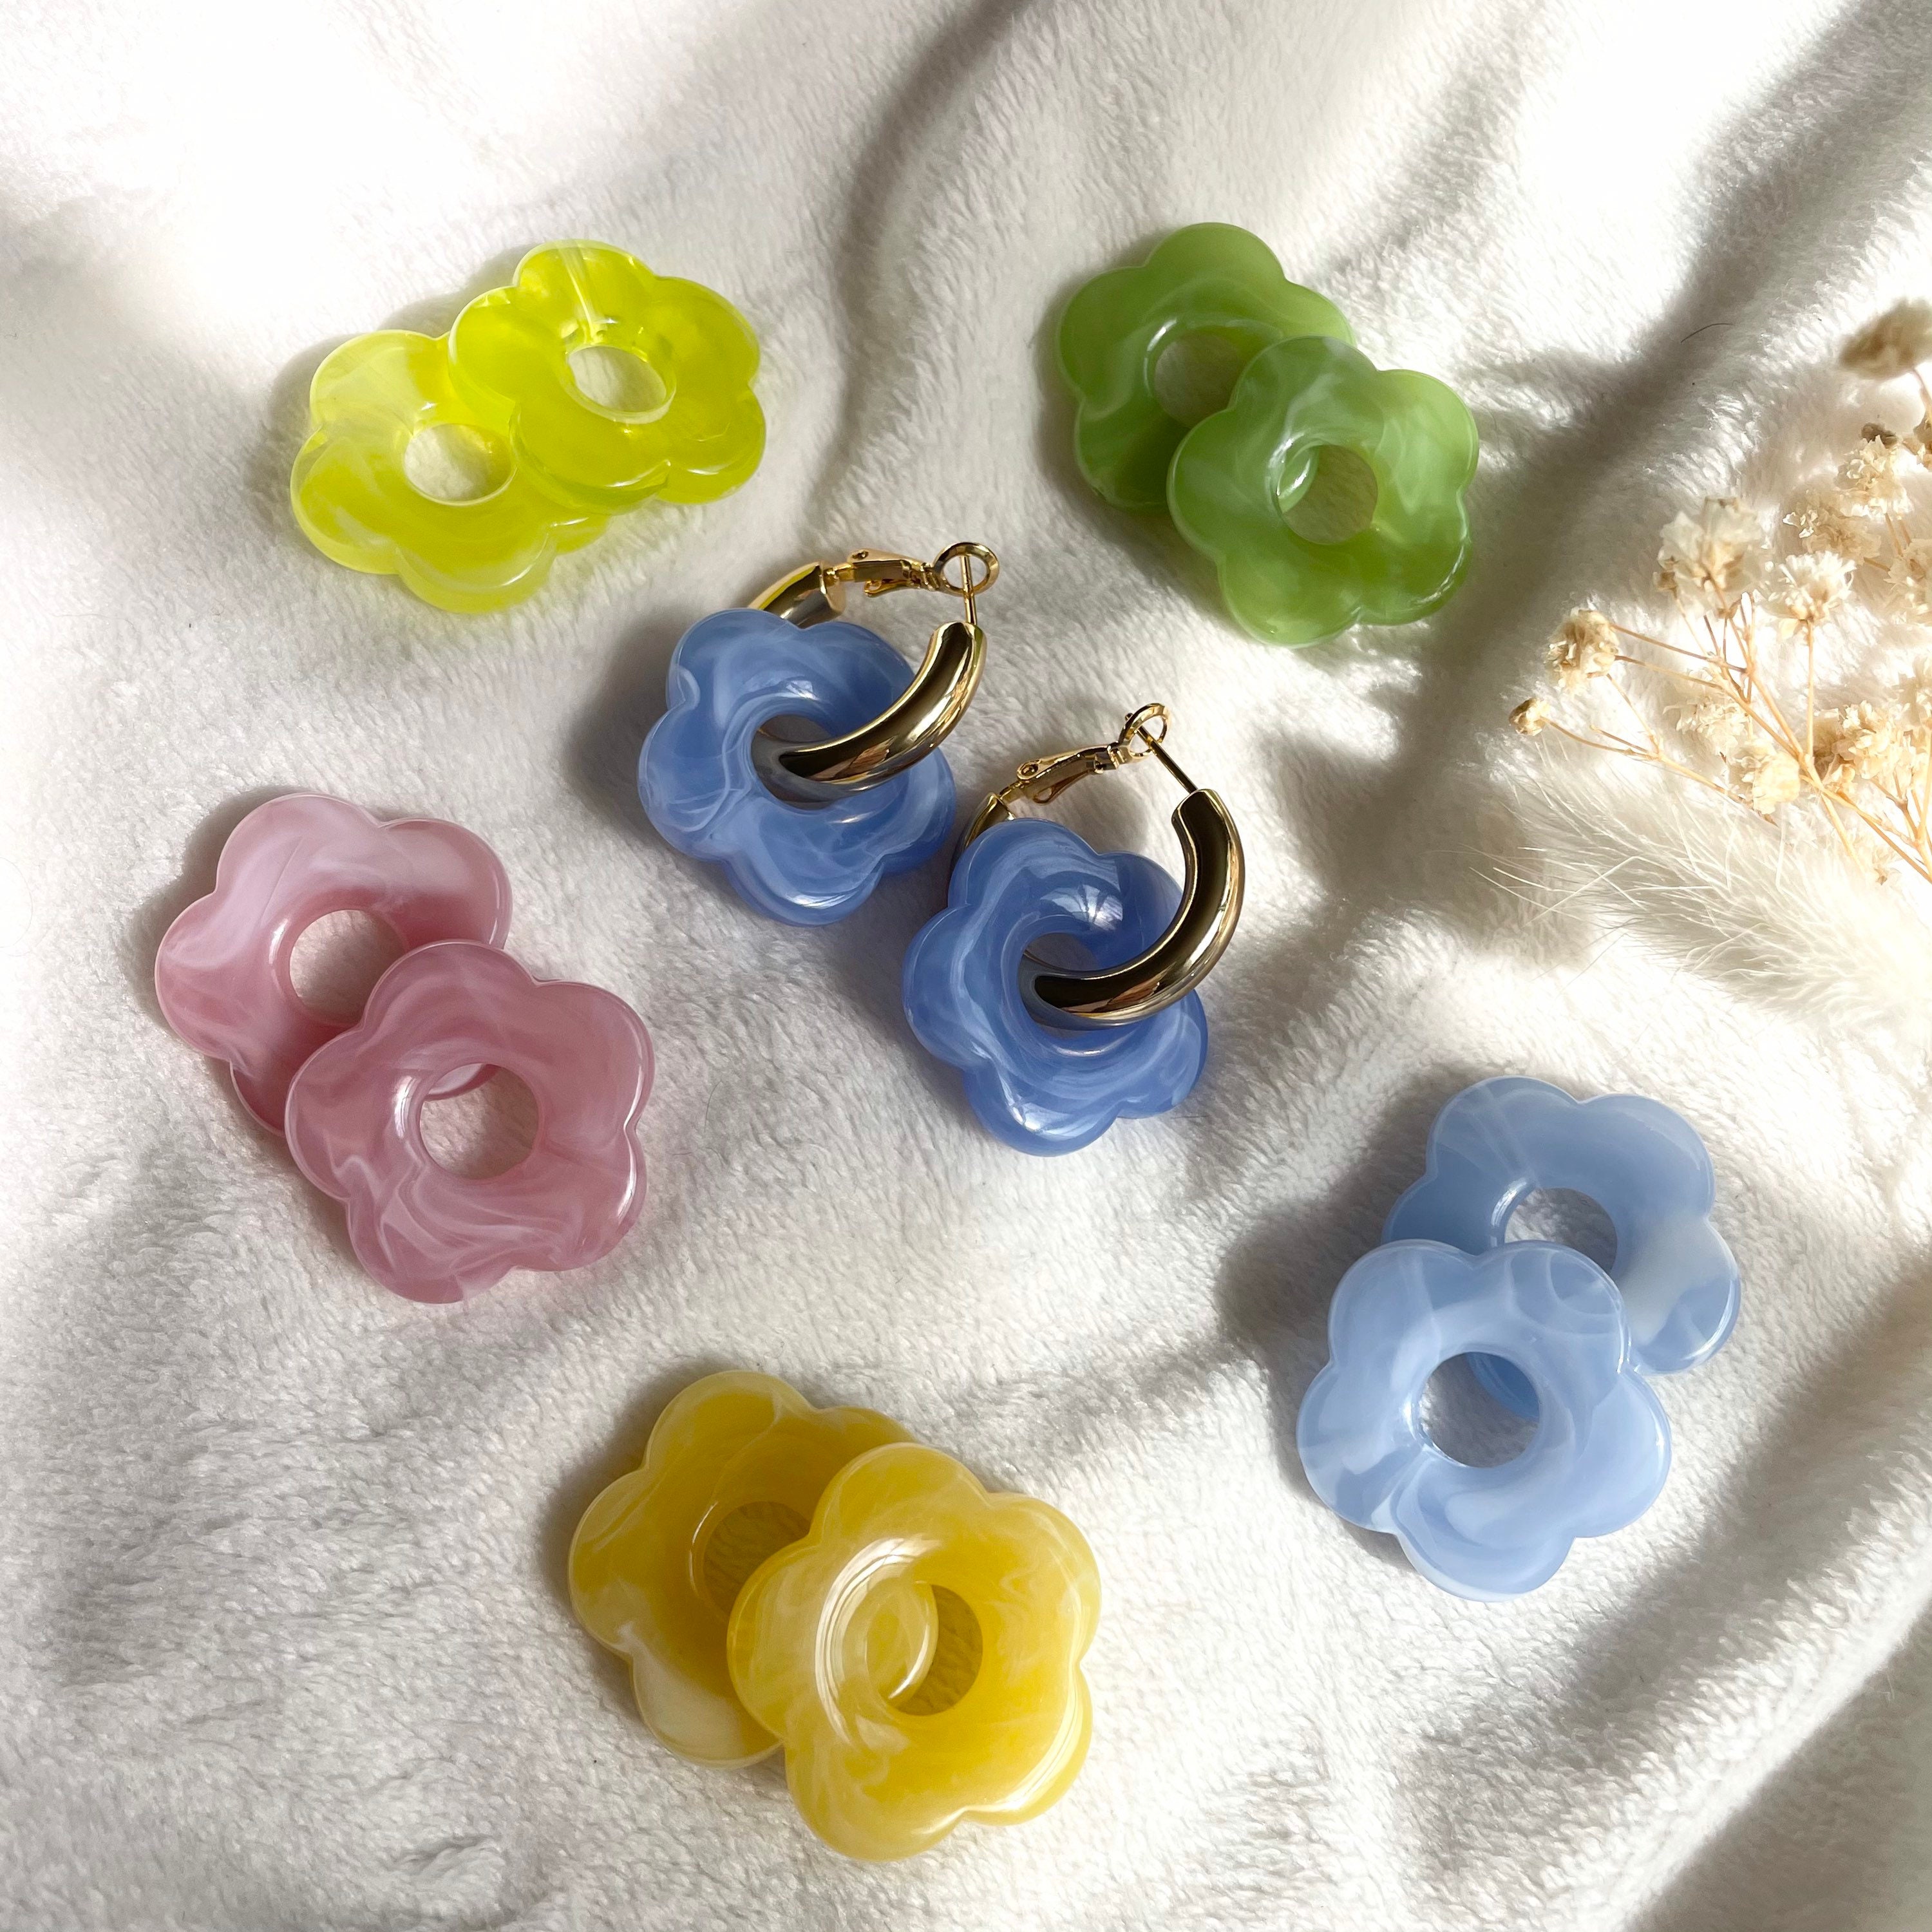 Flower Cut-Out Plastic Earrings - Colorful Retro Jewelry